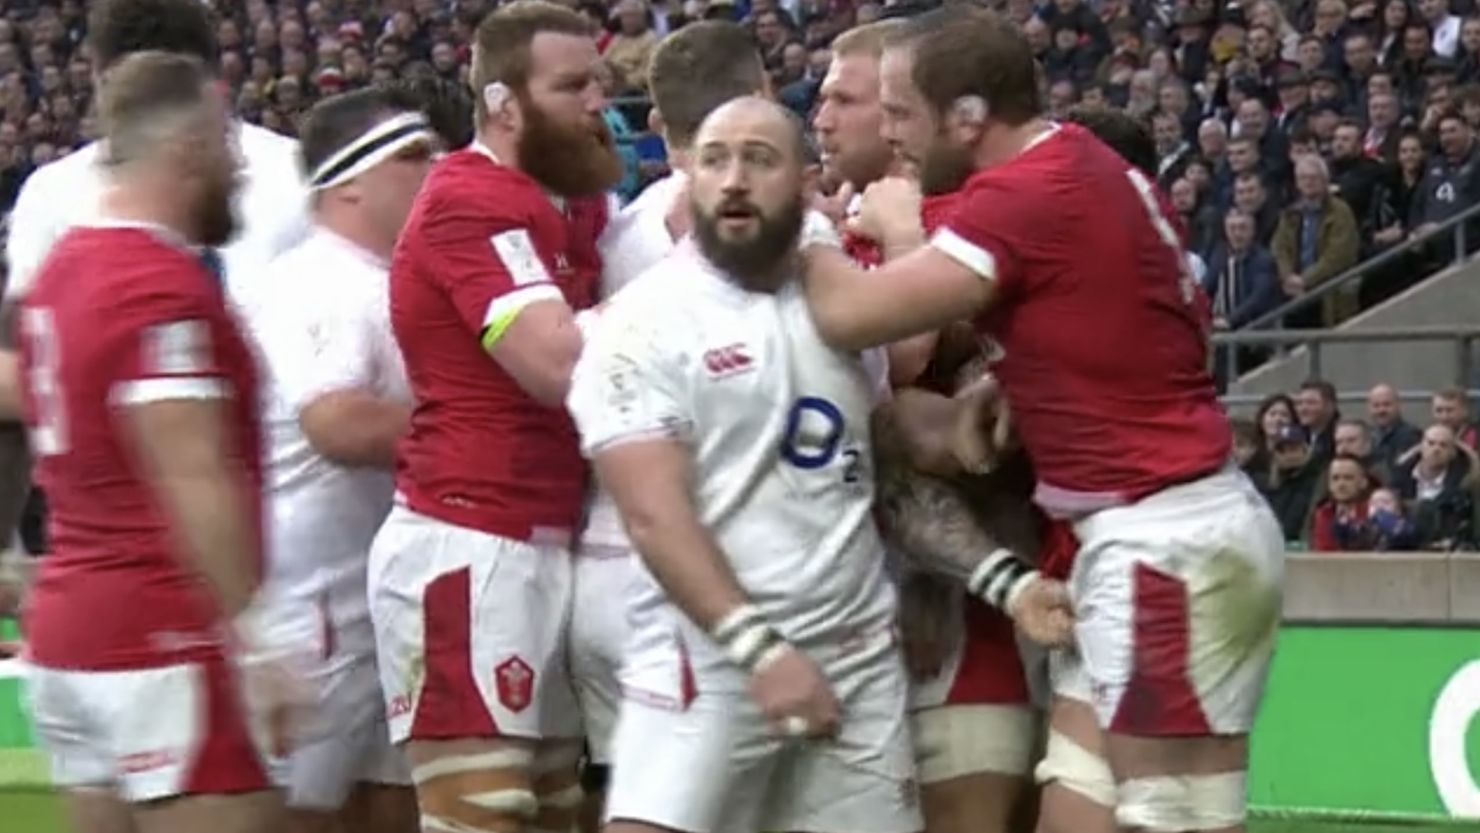 The incident between Marler and Jones occurred in the first half of the Six Nations clash at Twickenham.